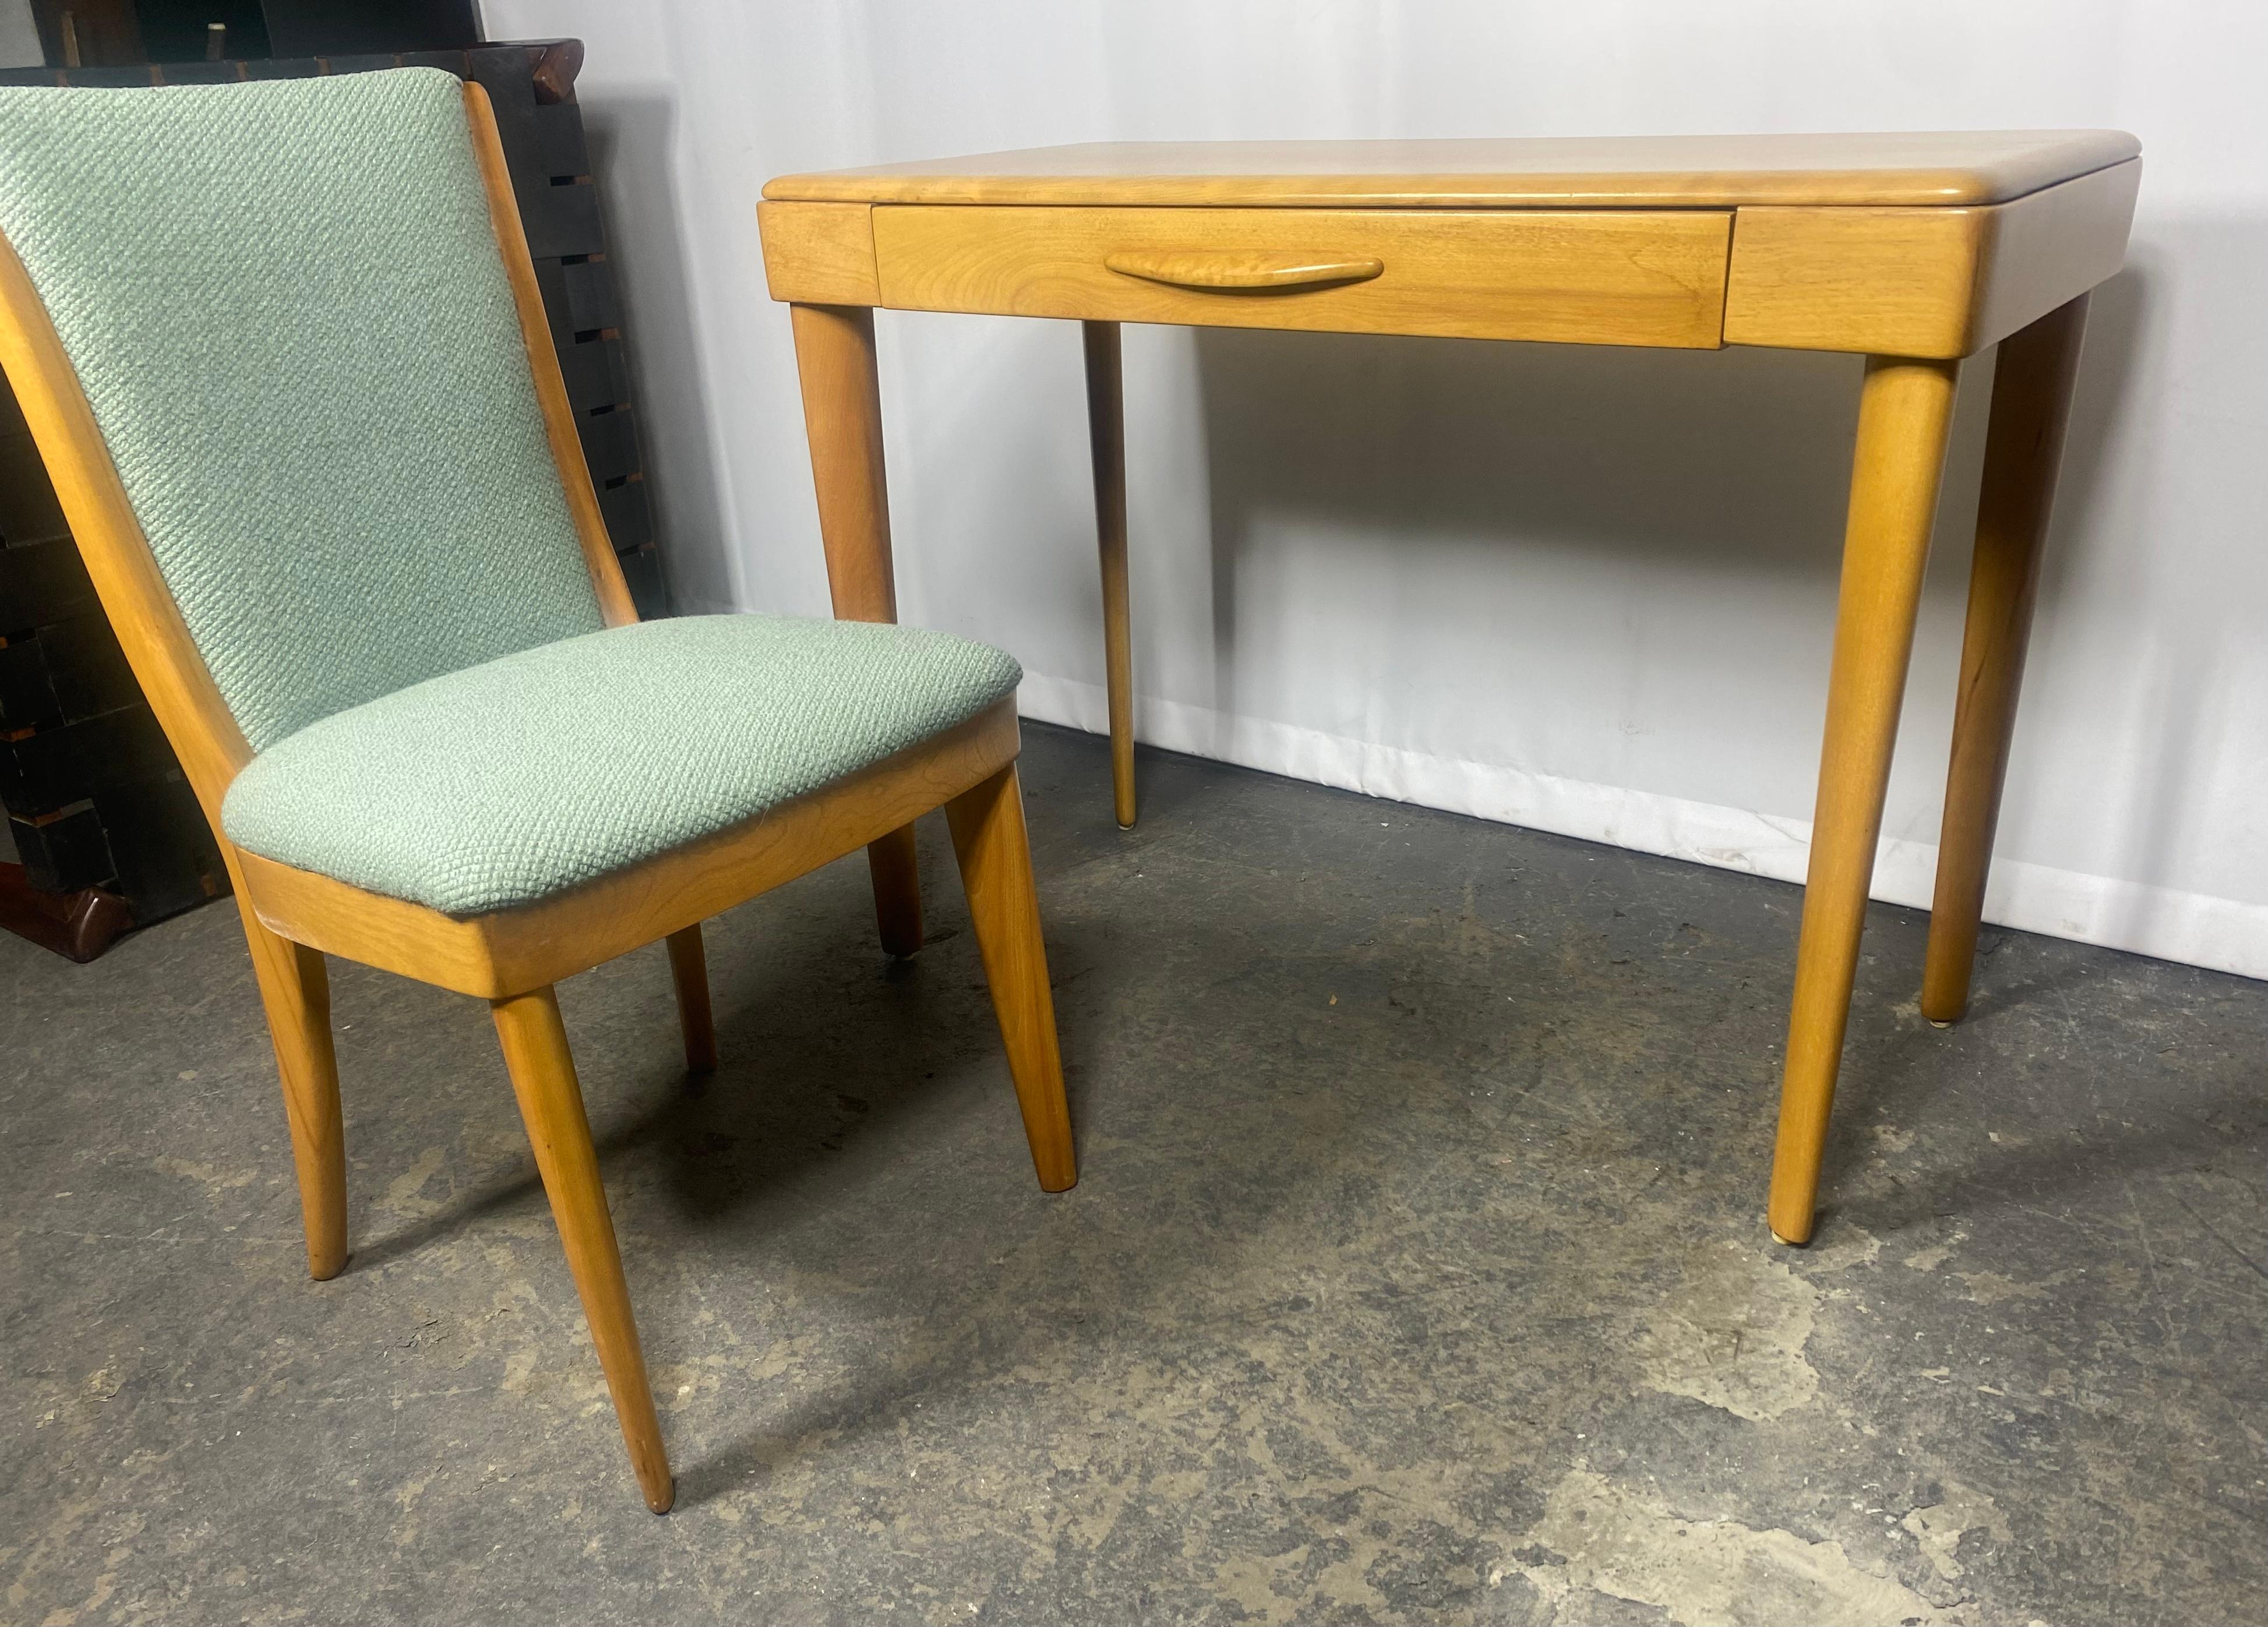 Elegant Heywood Wakefield Ladies Writing Desk & Chair In Good Condition For Sale In Buffalo, NY